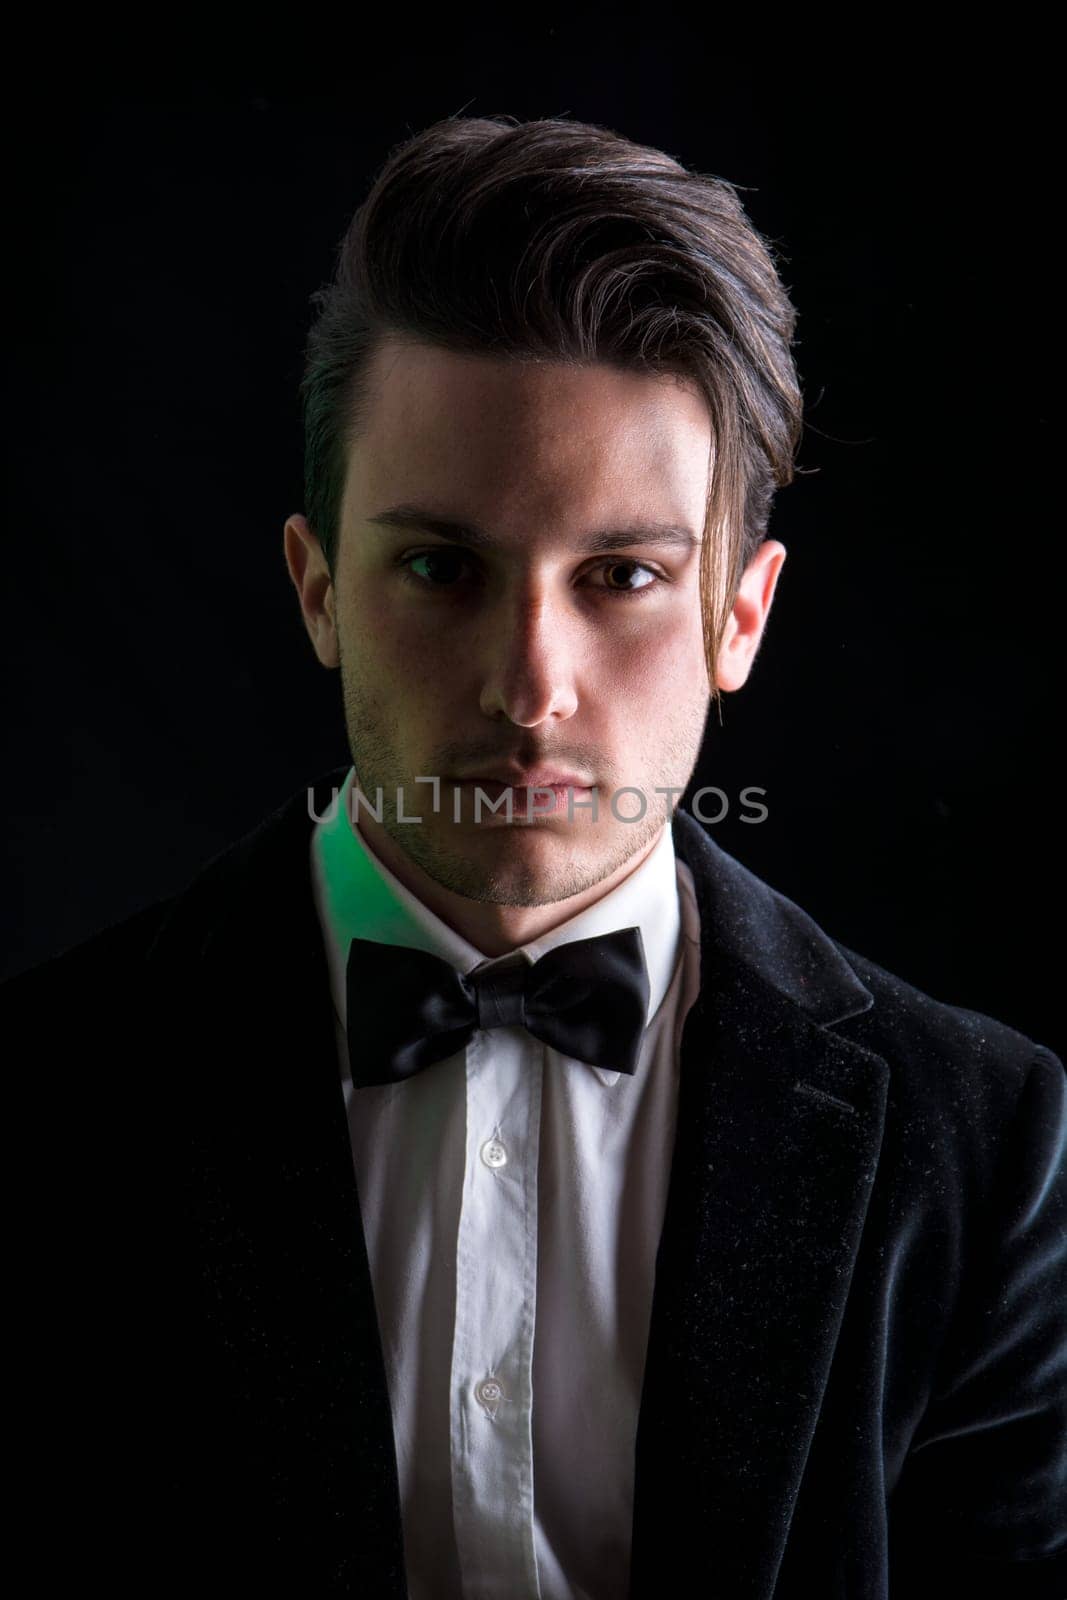 A man in a suit and bow tie